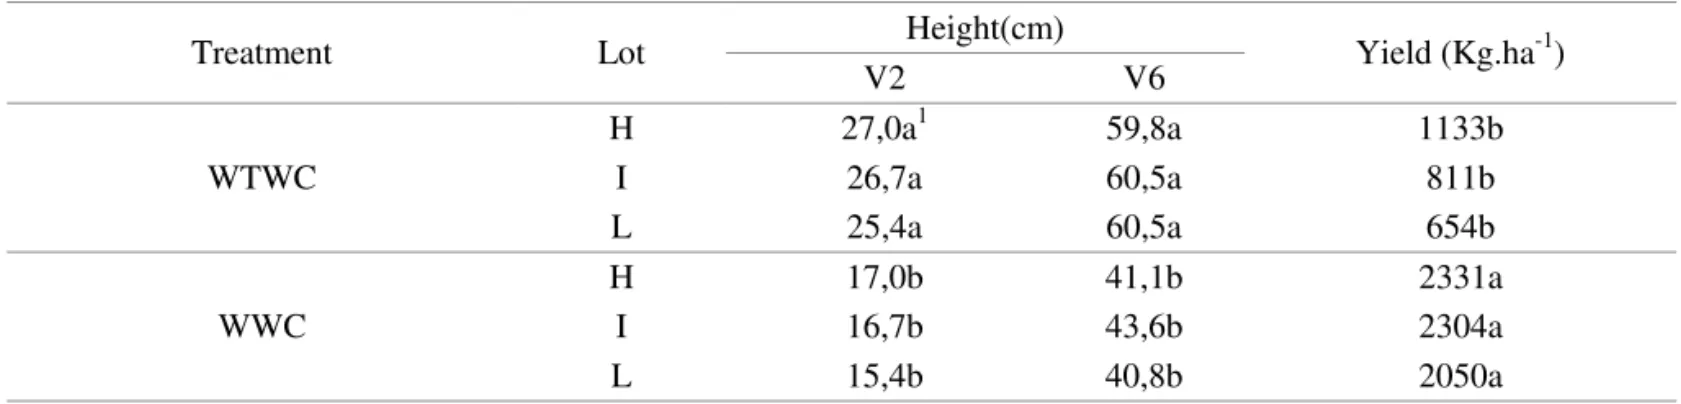 TABLE  2.  Plant  height  and  grain  yield  of  soybean  crop  in  weeded  (WWC)  and  unweeded  plots  (WTWC),  composed of high (H), intermediate (I) and low (L) seed vigor lots.